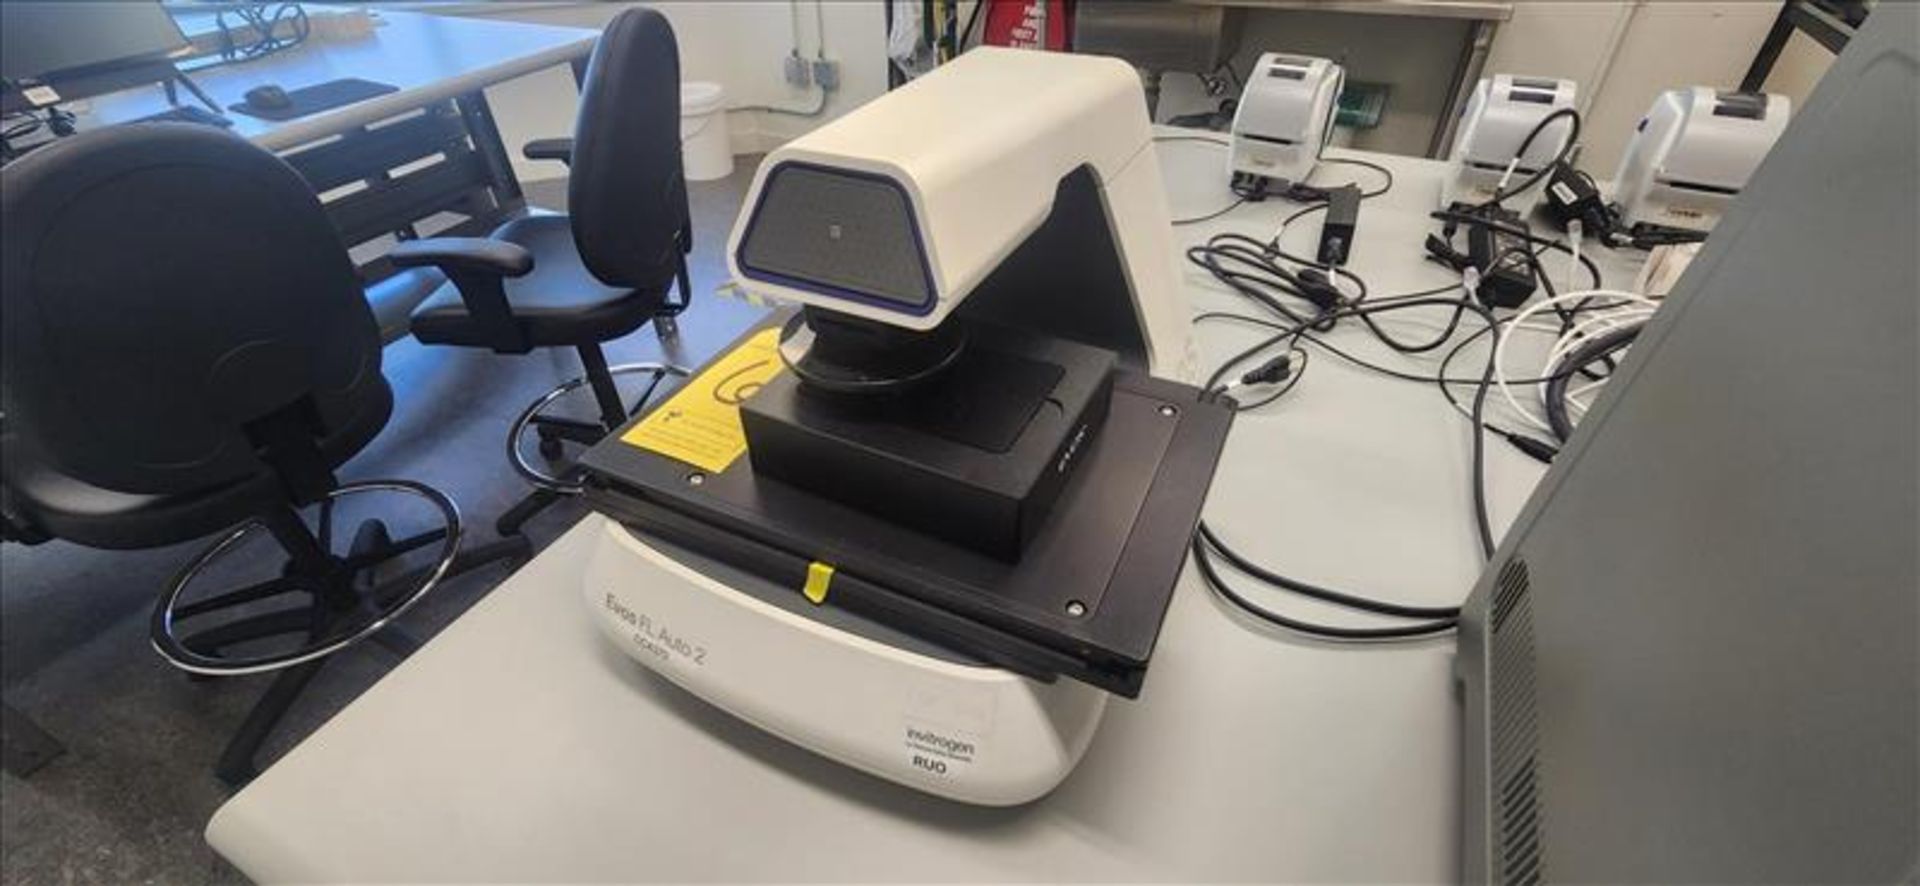 Thermo Fisher Invitrogen EVOS Auto 2 Imaging System, S/N L2315-179C-0031R - Image 2 of 3